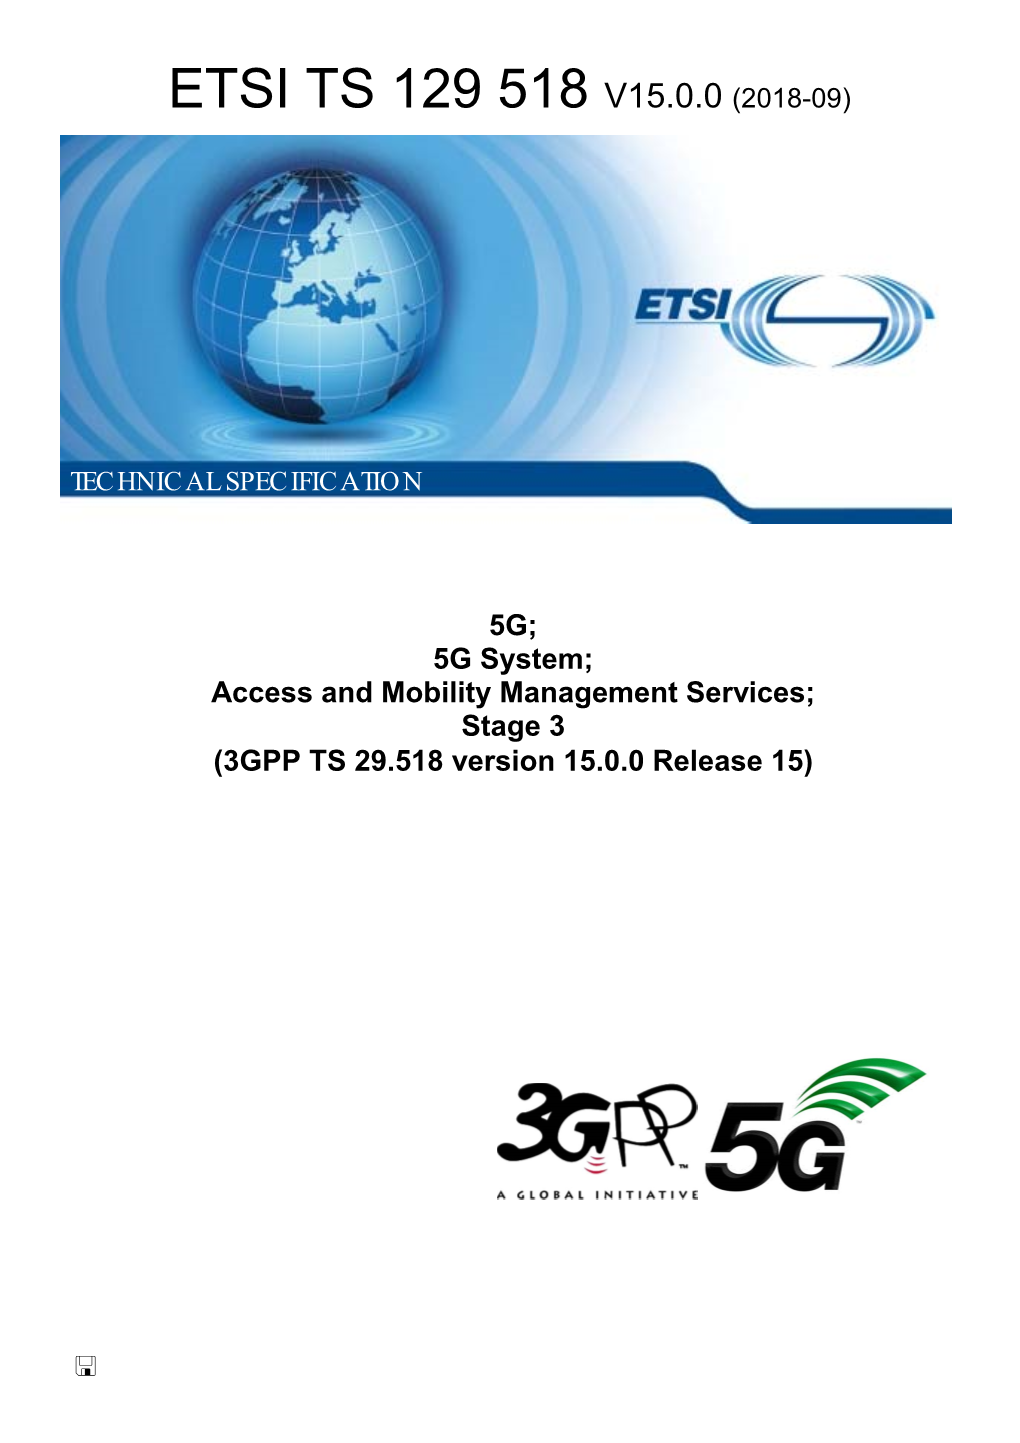 5G; 5G System; Access and Mobility Management Services; Stage 3 (3GPP TS 29.518 Version 15.0.0 Release 15)